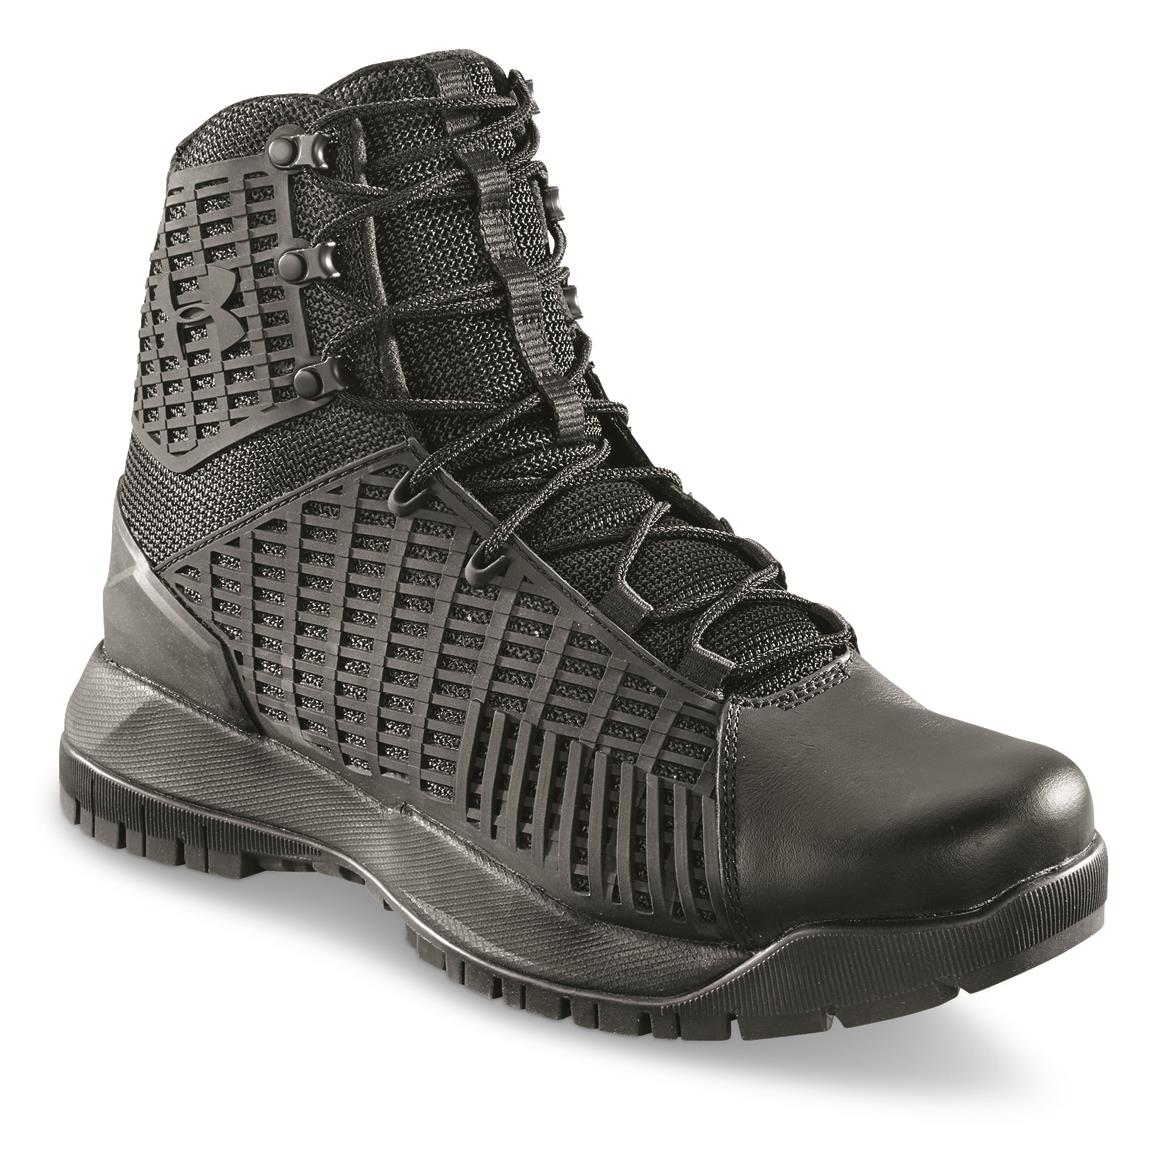 under armour stryker boots